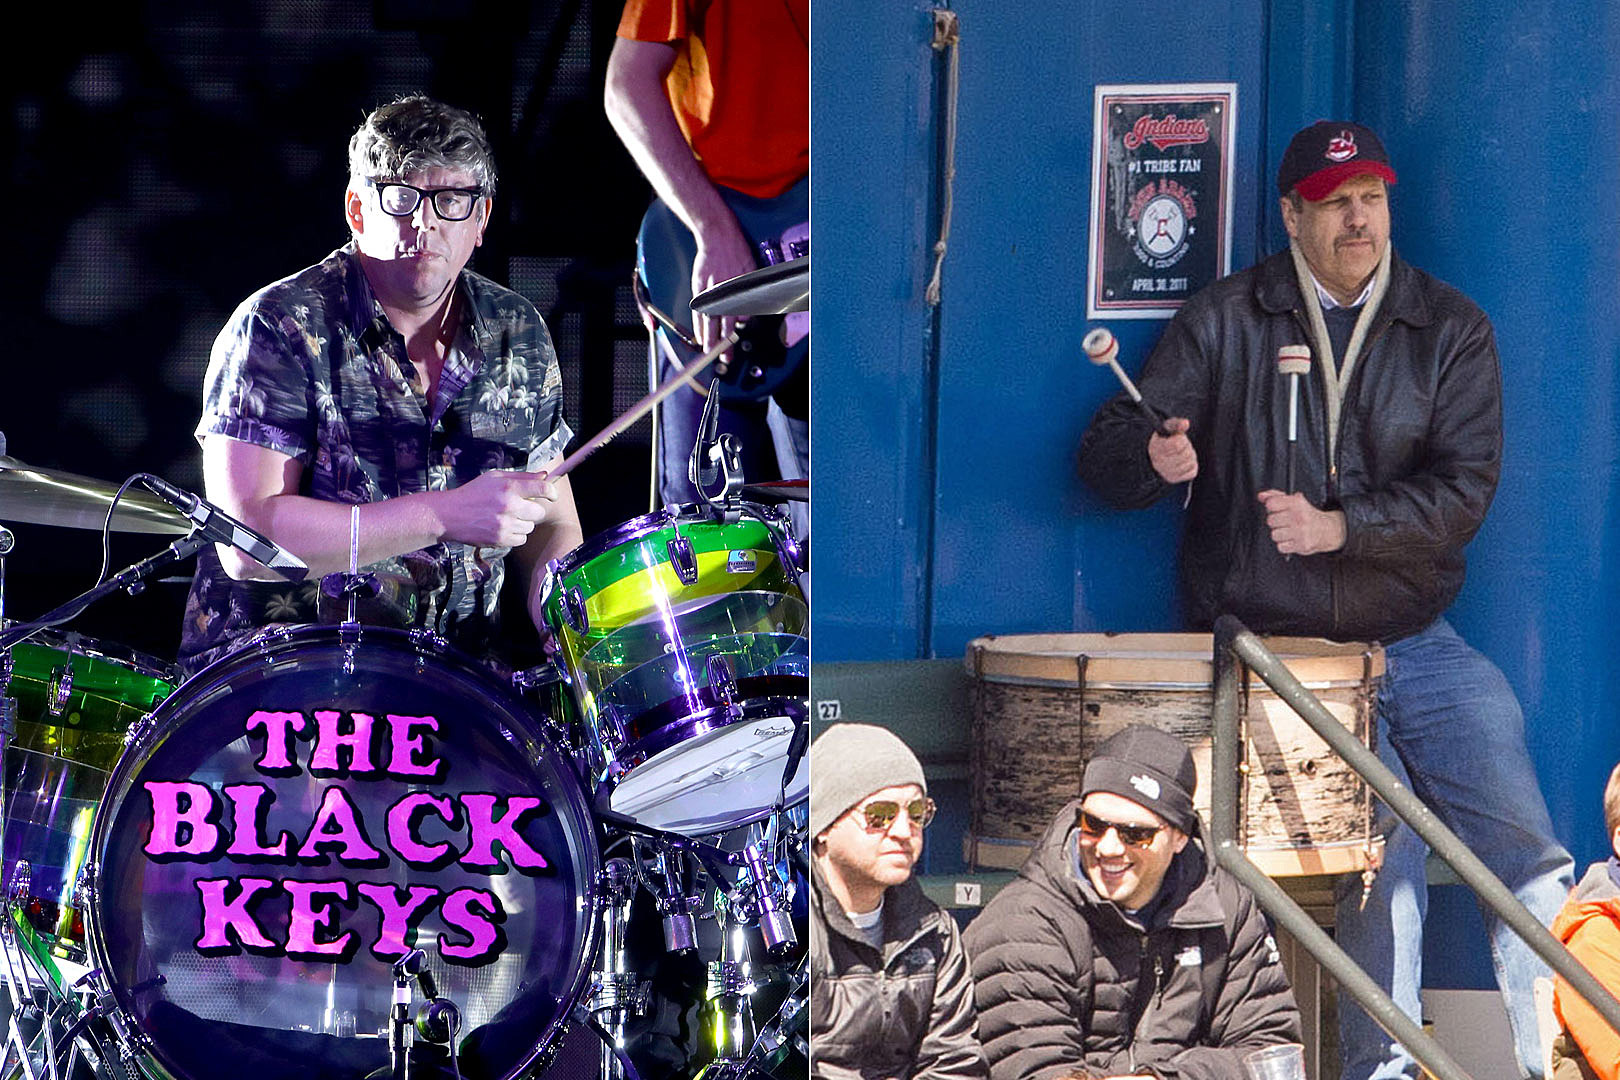 Patrick Carney - The Black Keys' Break 'Was Necessary' for Growth